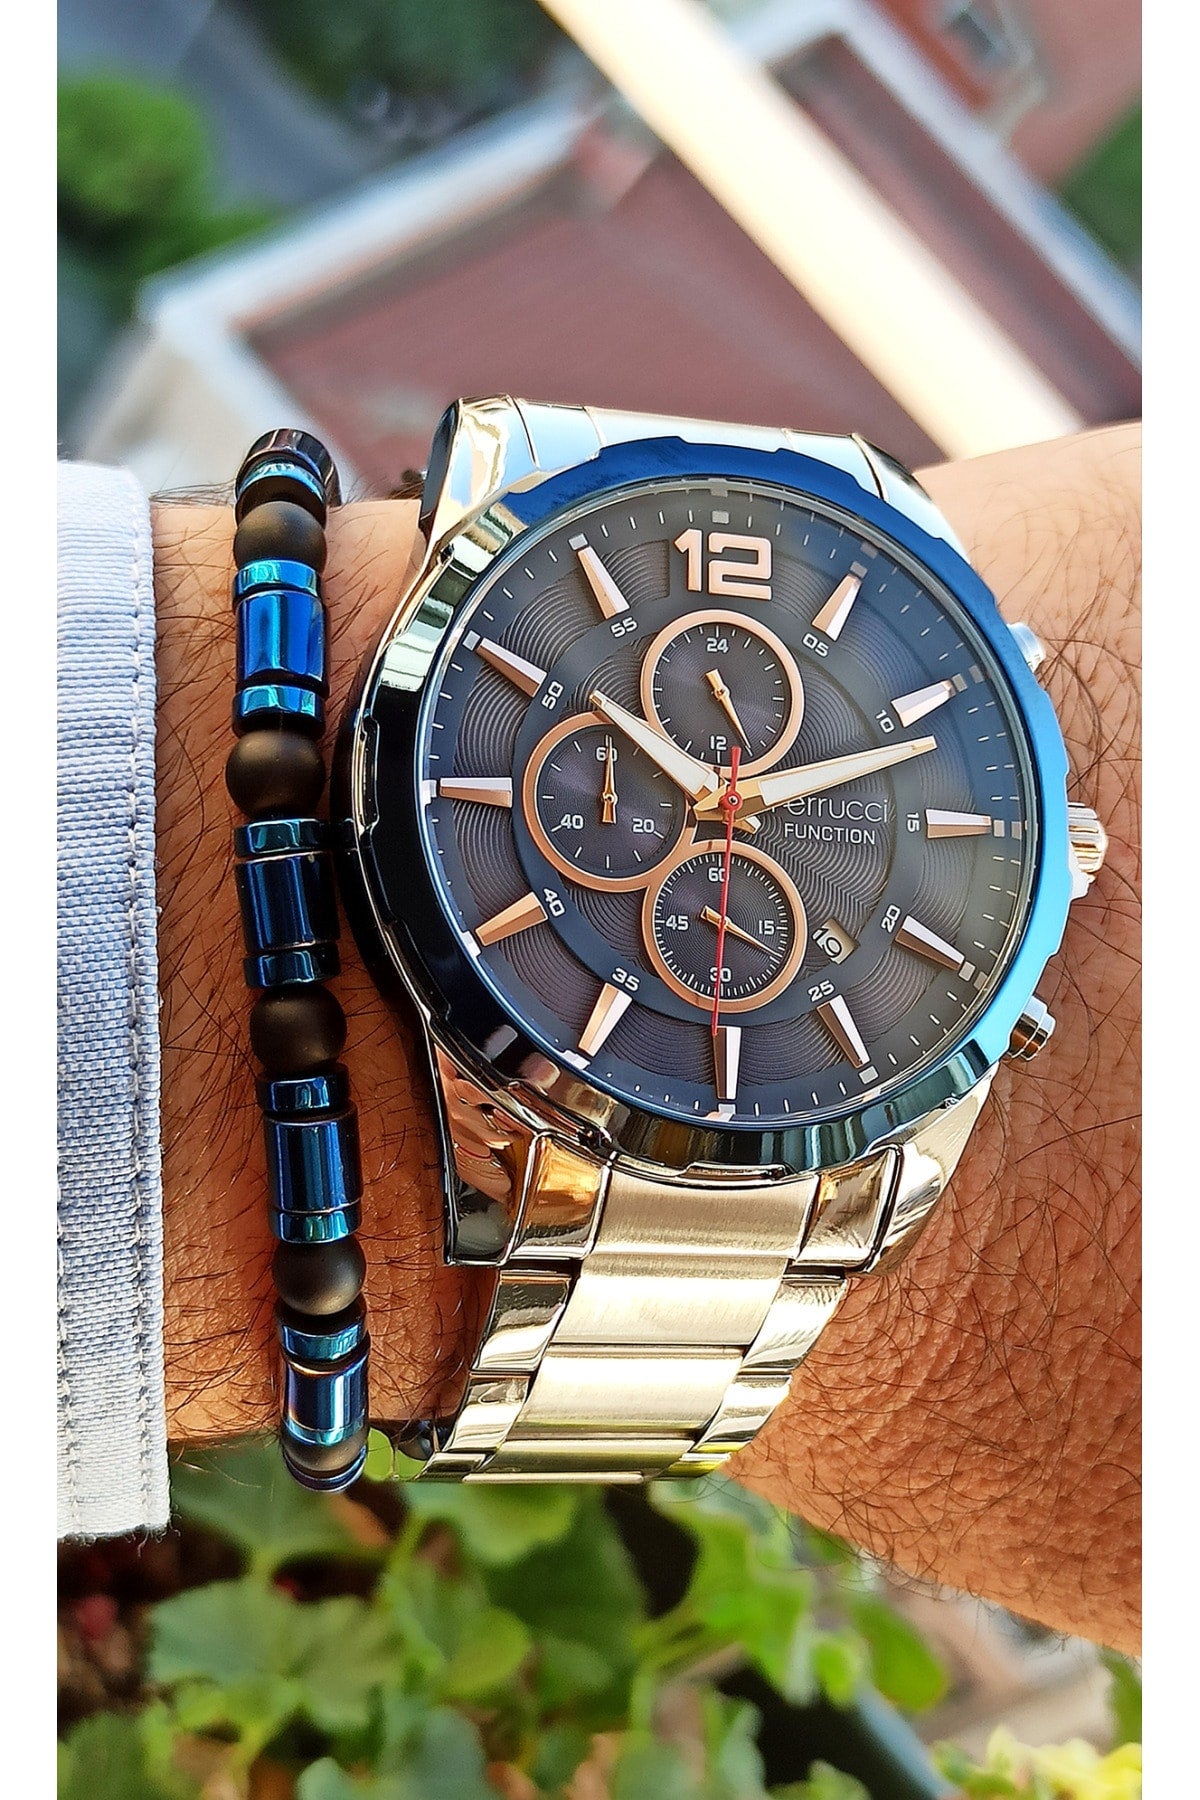 Functions of Active Men's Wristwatch+wristband